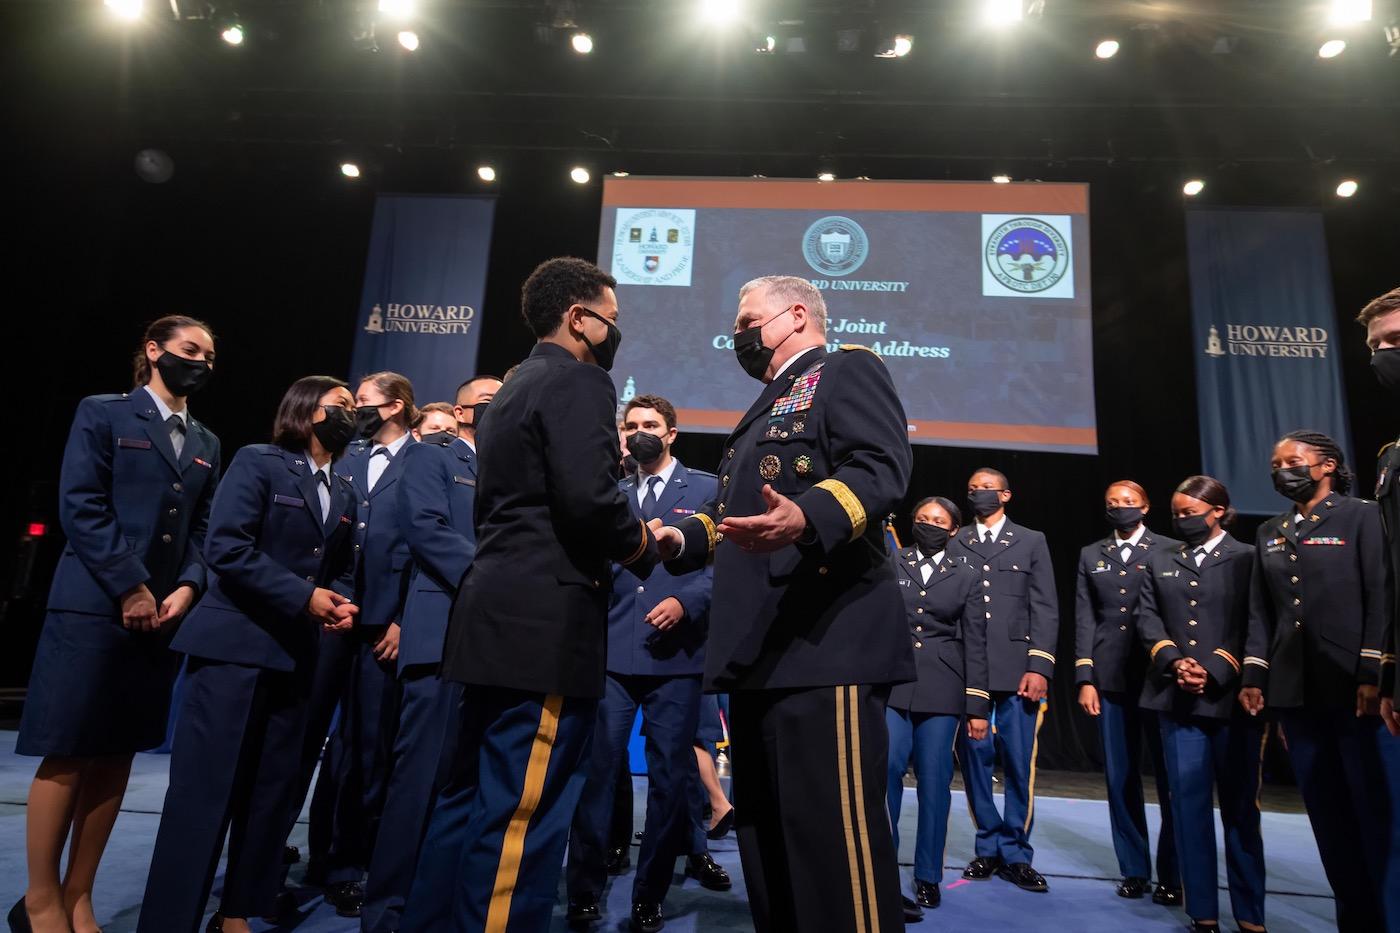 ROTC leader shanking hands with cadets at graduation